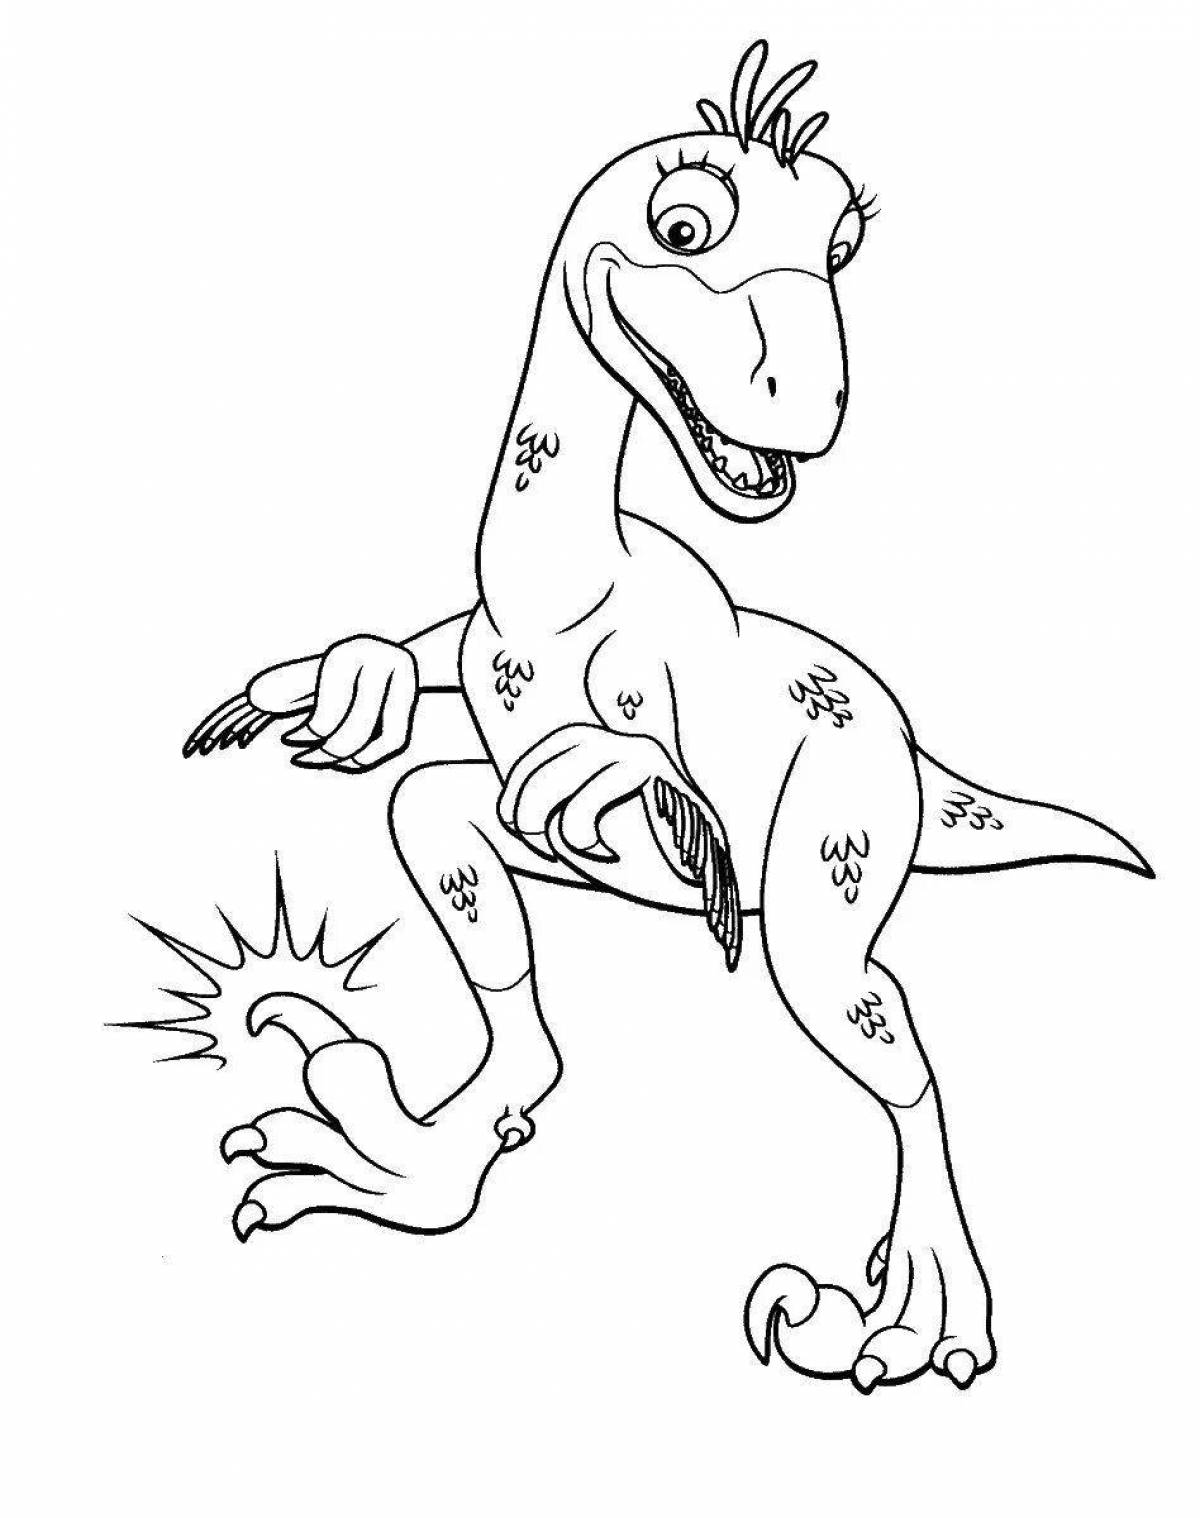 Live dino coloring page